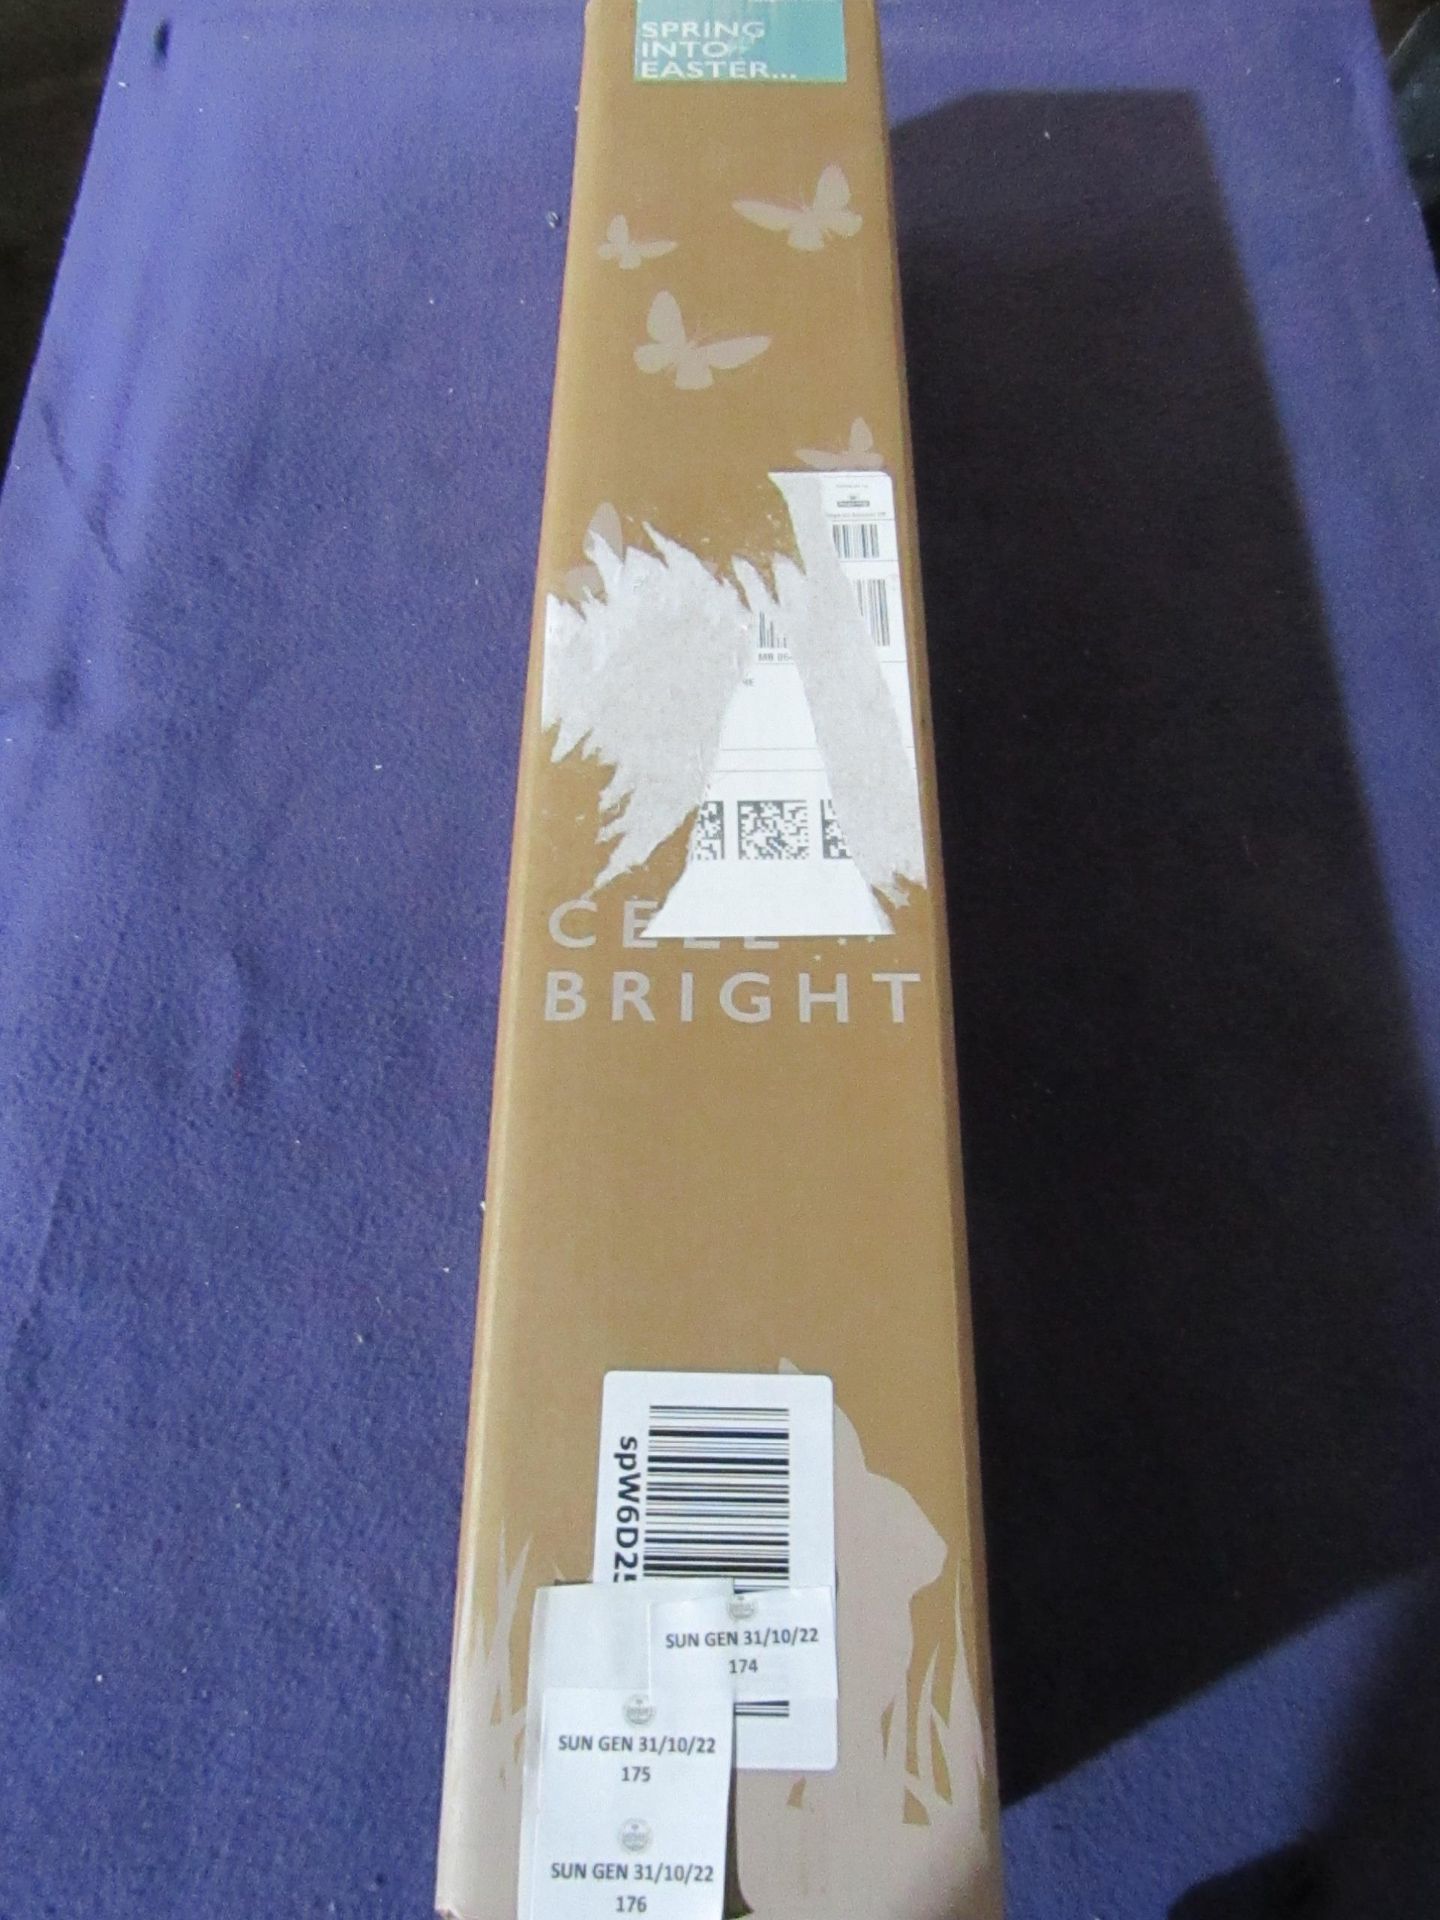 Celebright - 24 LED Pre-Lit 2-Ft Easter Twig Tree Warm White - Unchecked & Boxed.